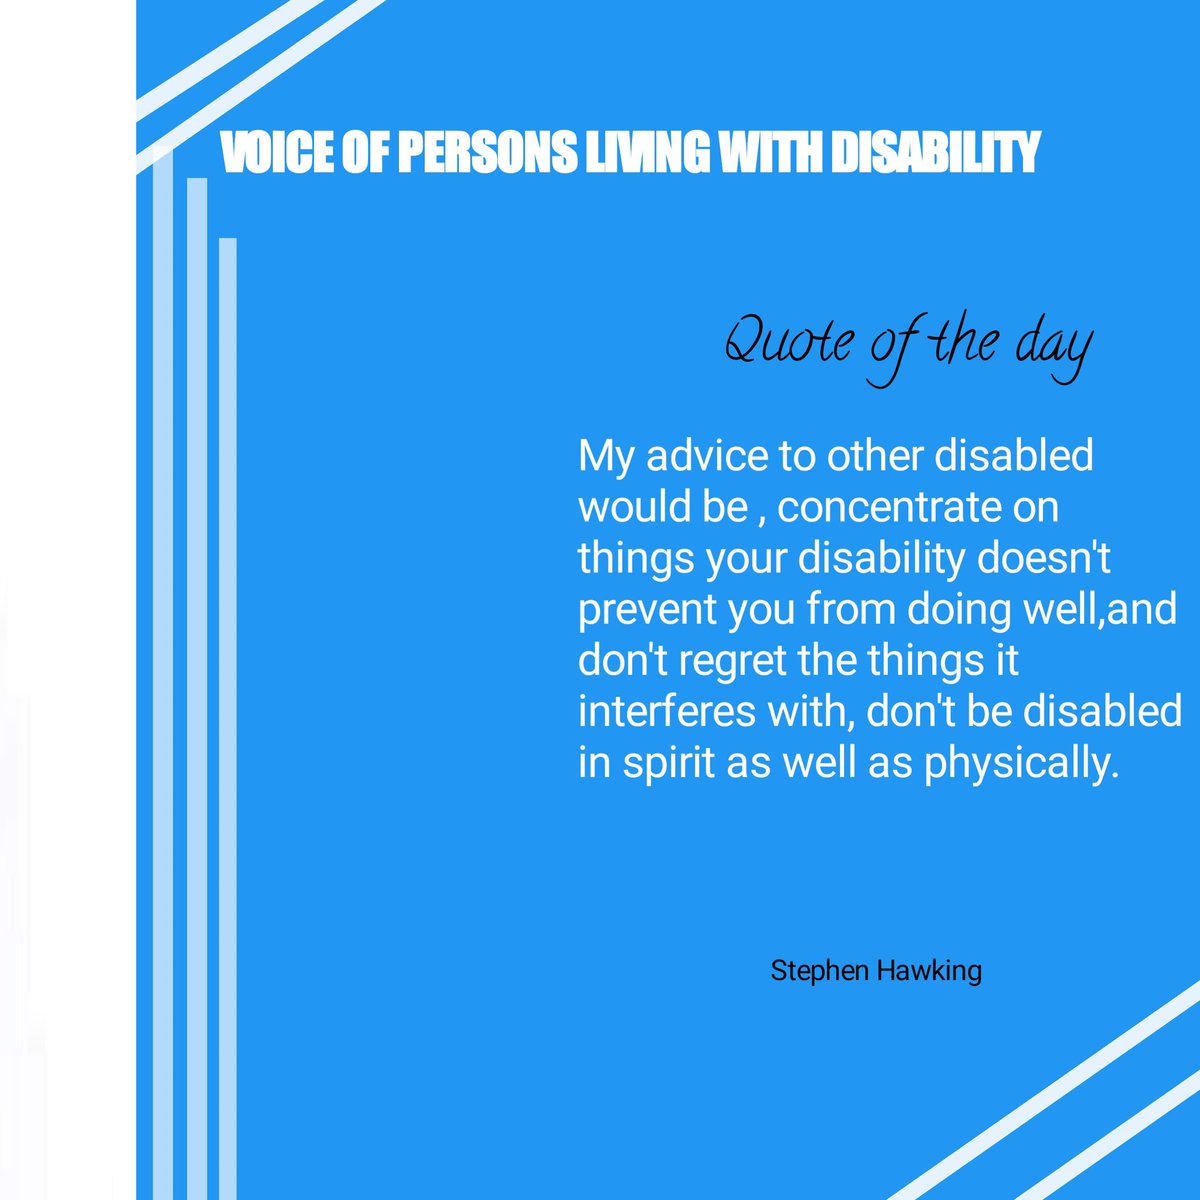 #personslivingwithdisability#physicallychallenge#deafanddumb#blind#aninclusiveworld#aniclusivesiciety#